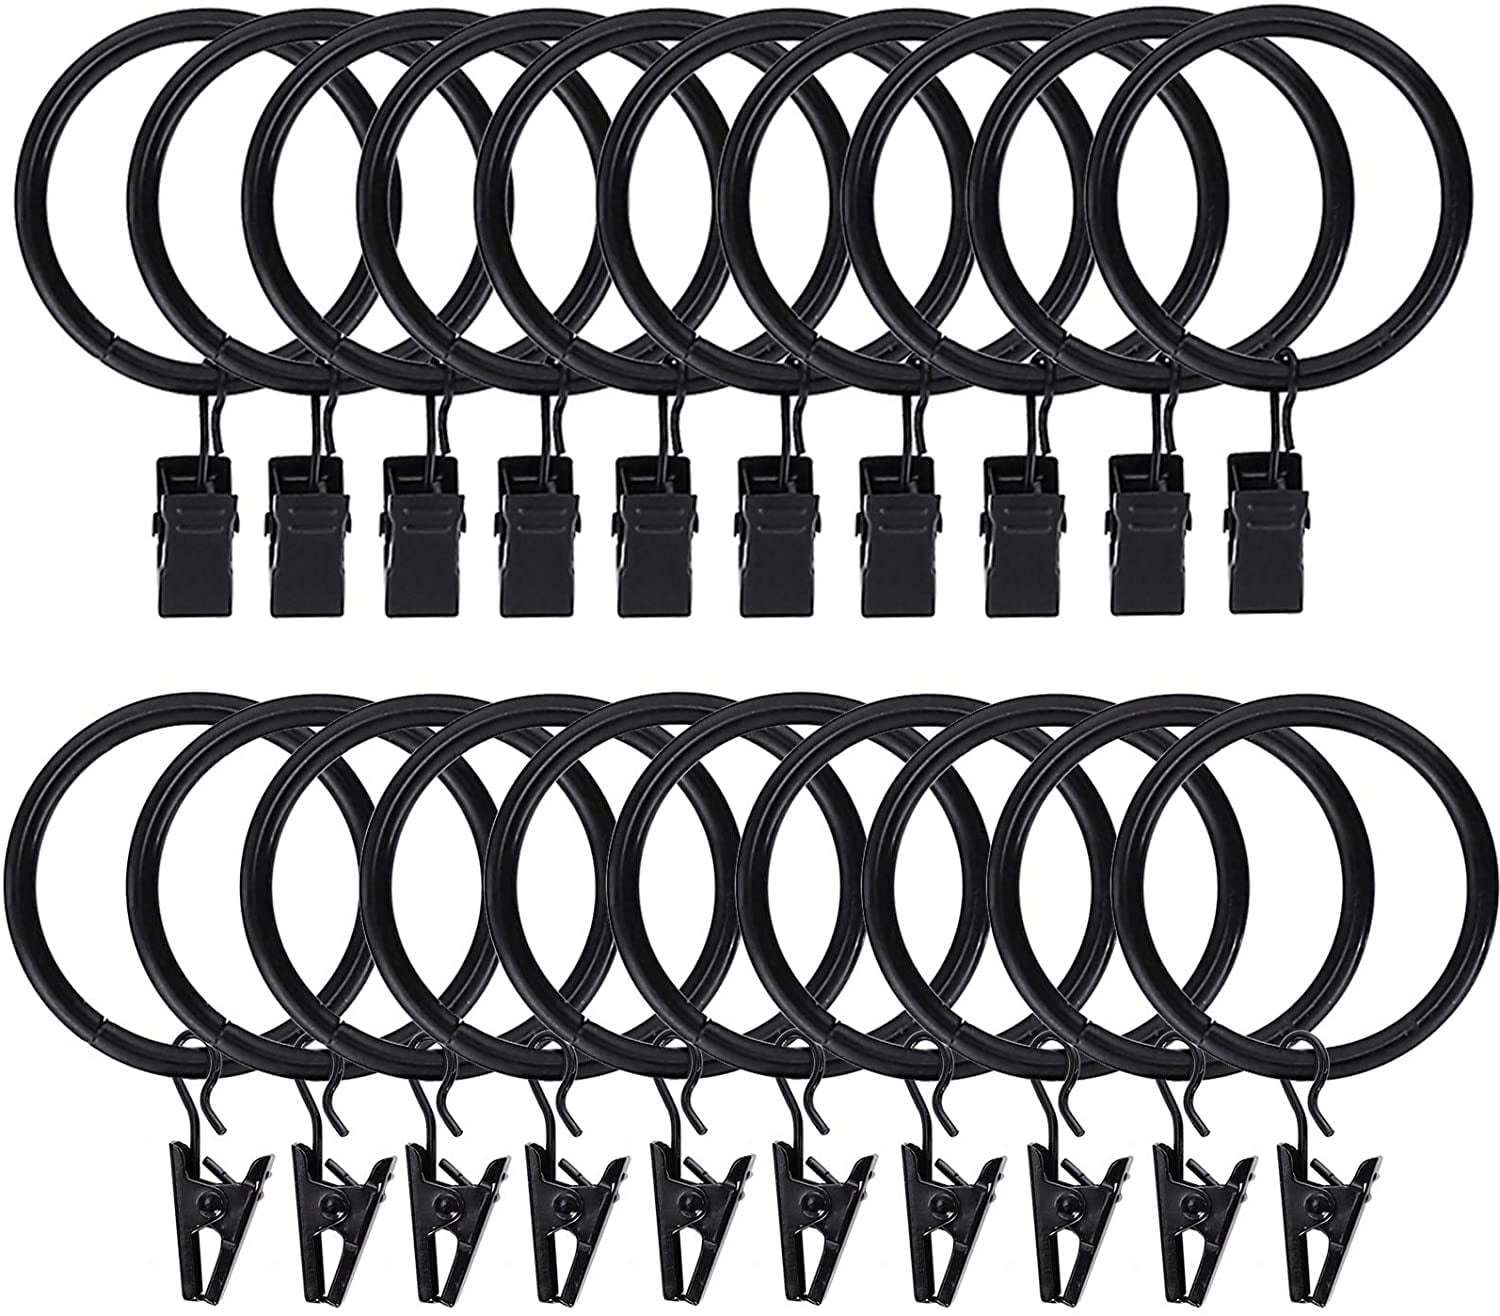 10PK Window Metal Curtain Drapery Rings w/ Clips & Eyelets Fits up to 1.38" Rod 